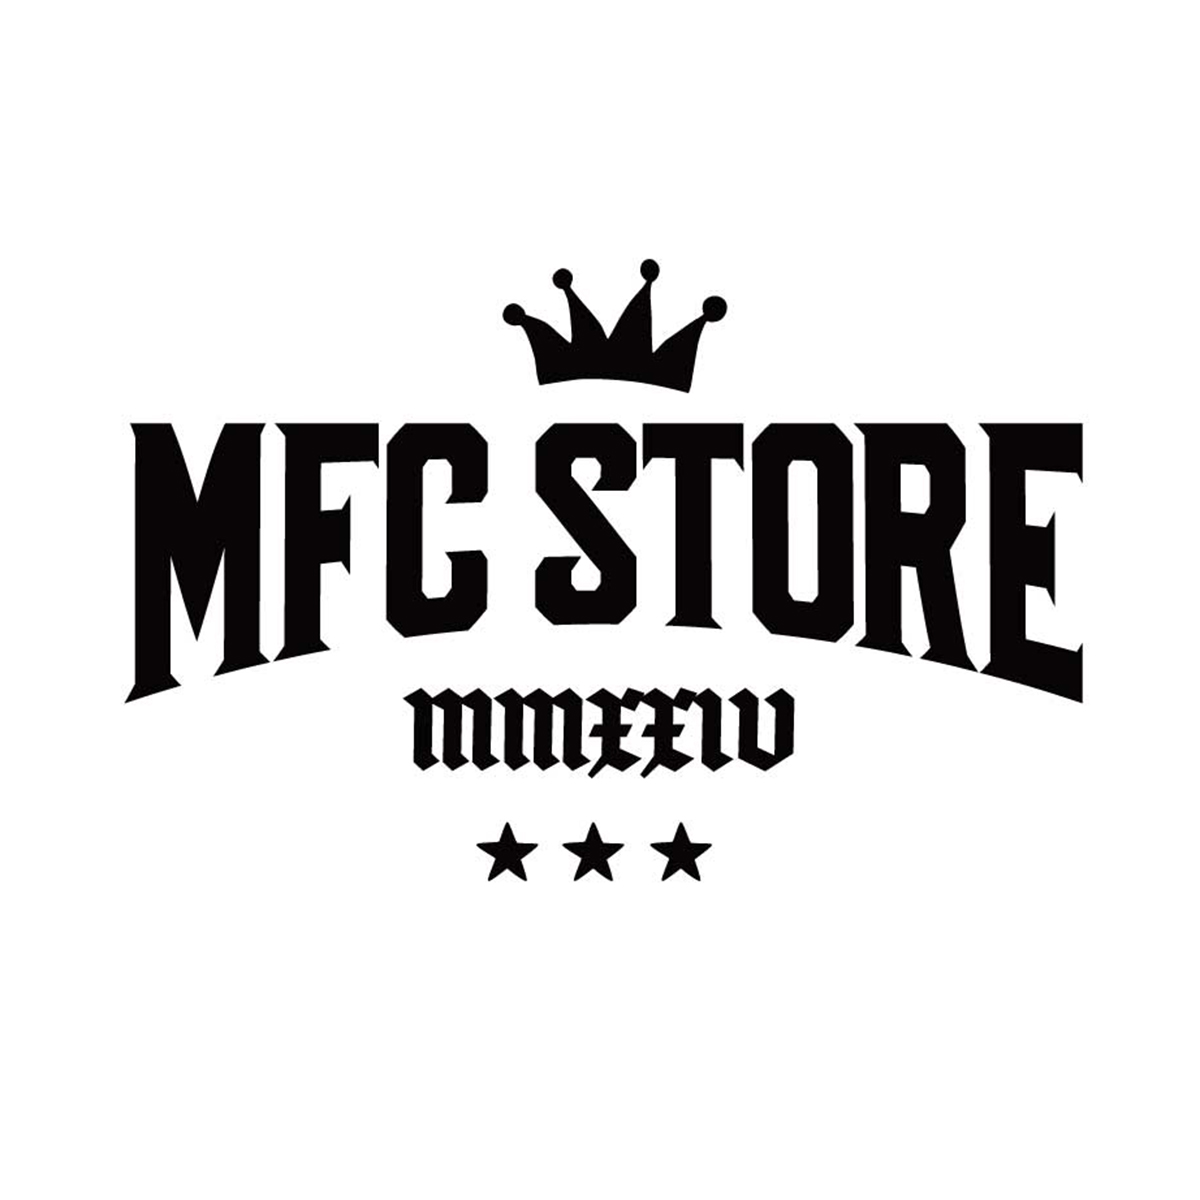 MFC STORE ORIGINAL | MFC STORE OFFICIAL ONLINESTORE